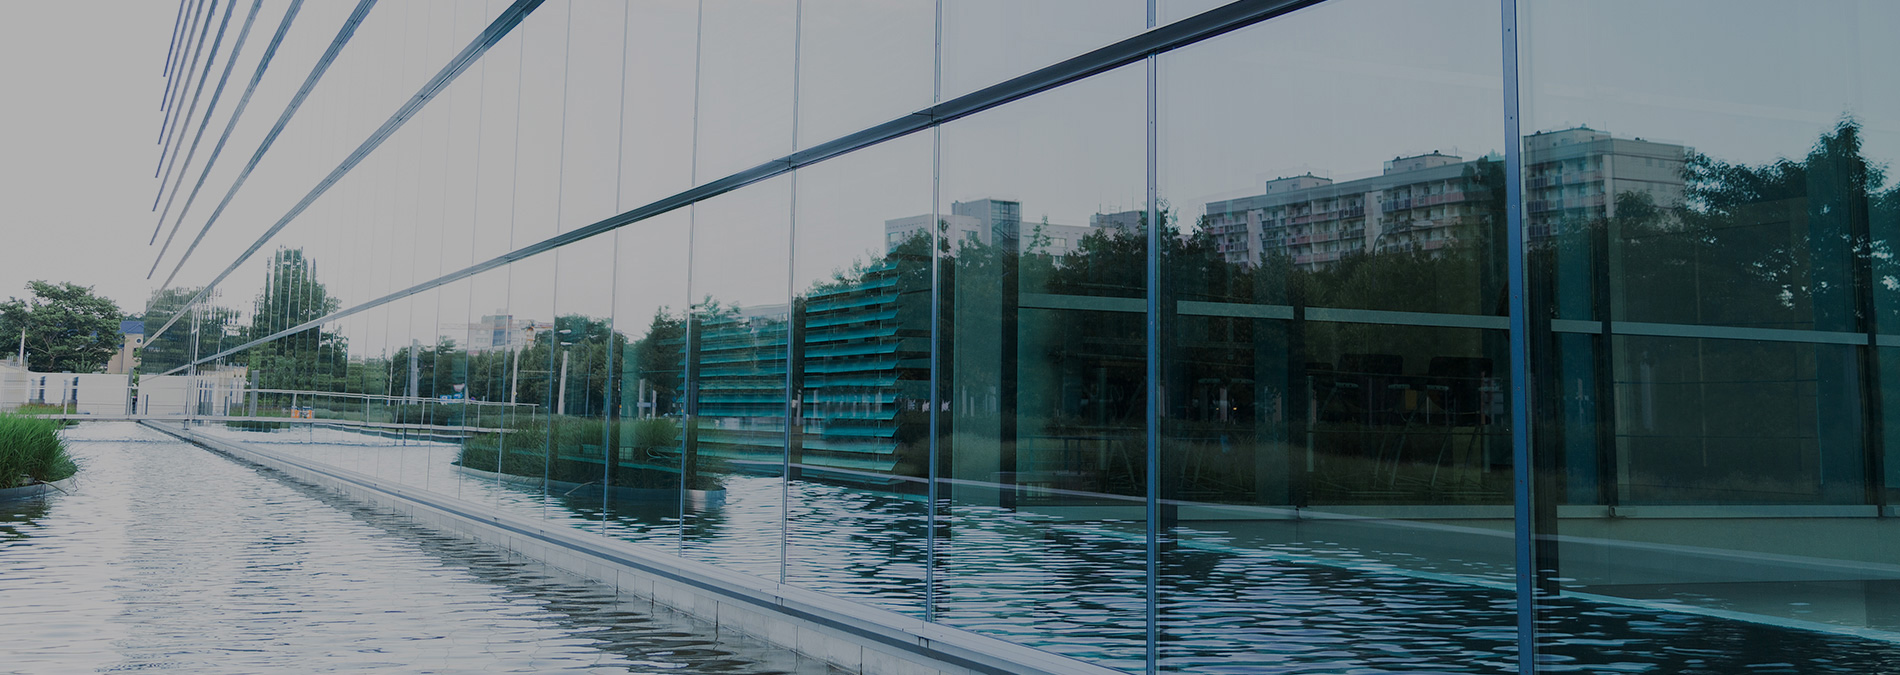 Modern-building-reflections-1900x675